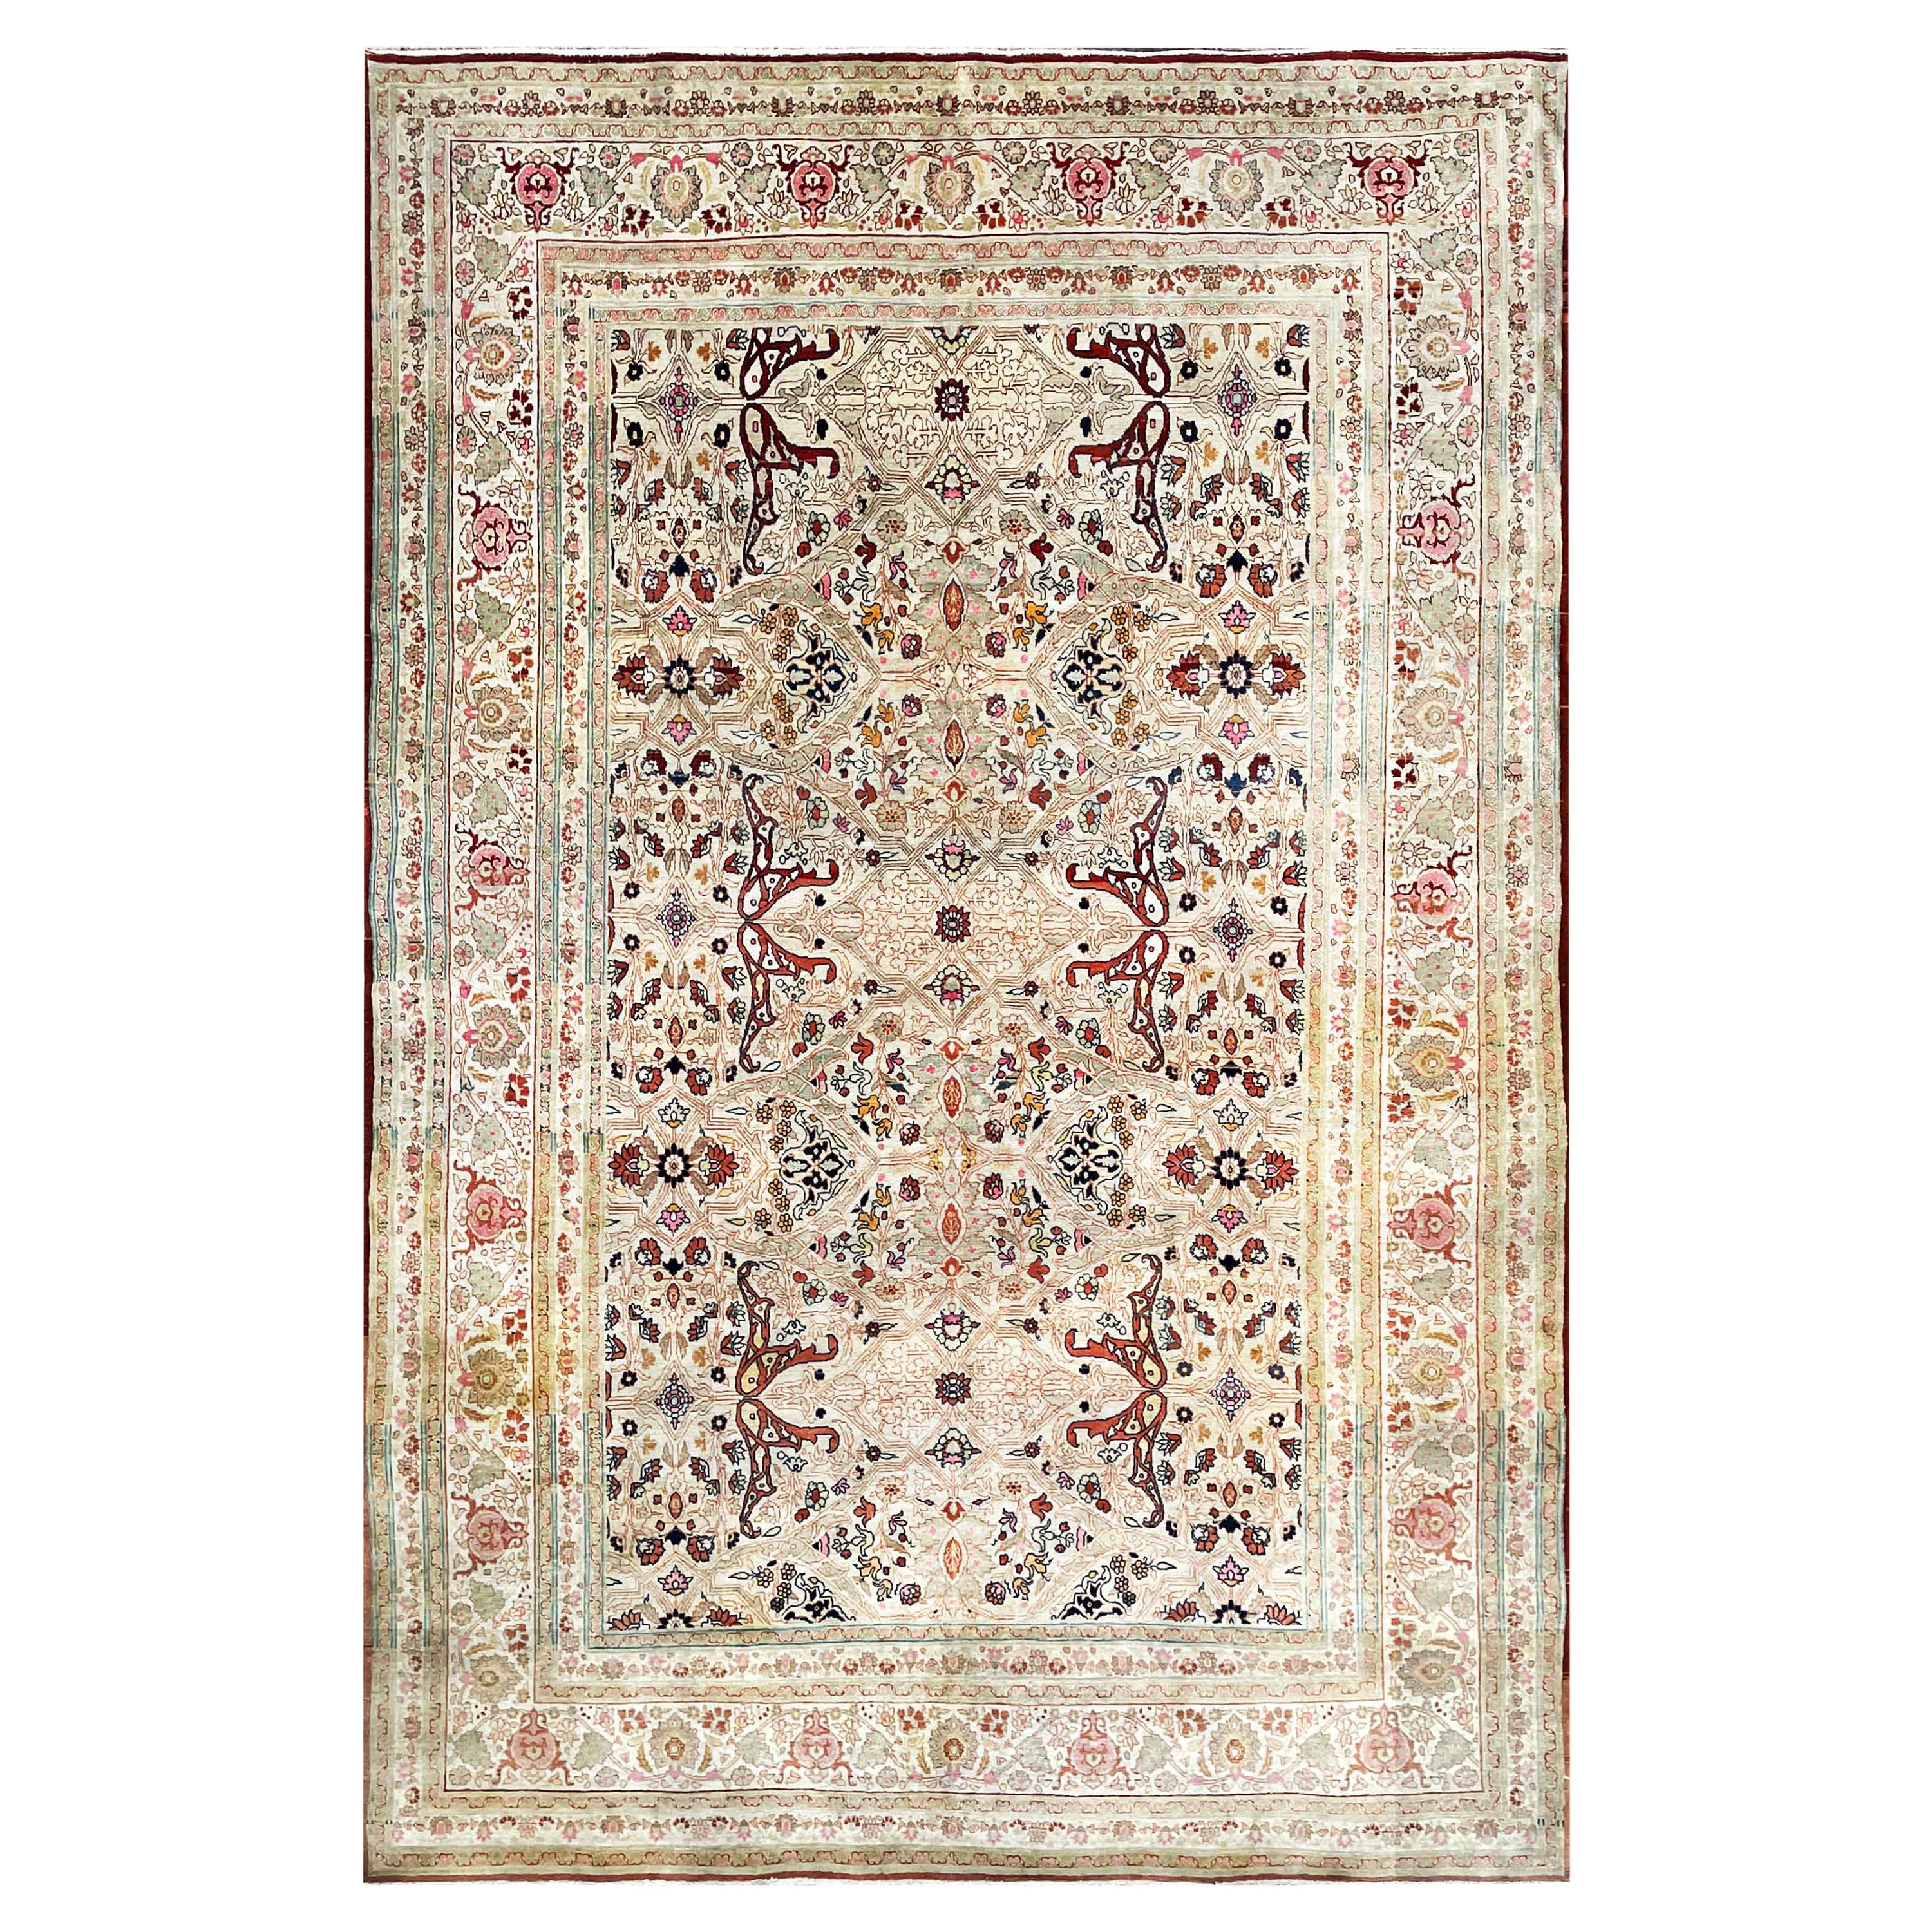 Antique Persian Tabriz Hajji Jalili Carpet, The crown Of Persian Rugs For Sale